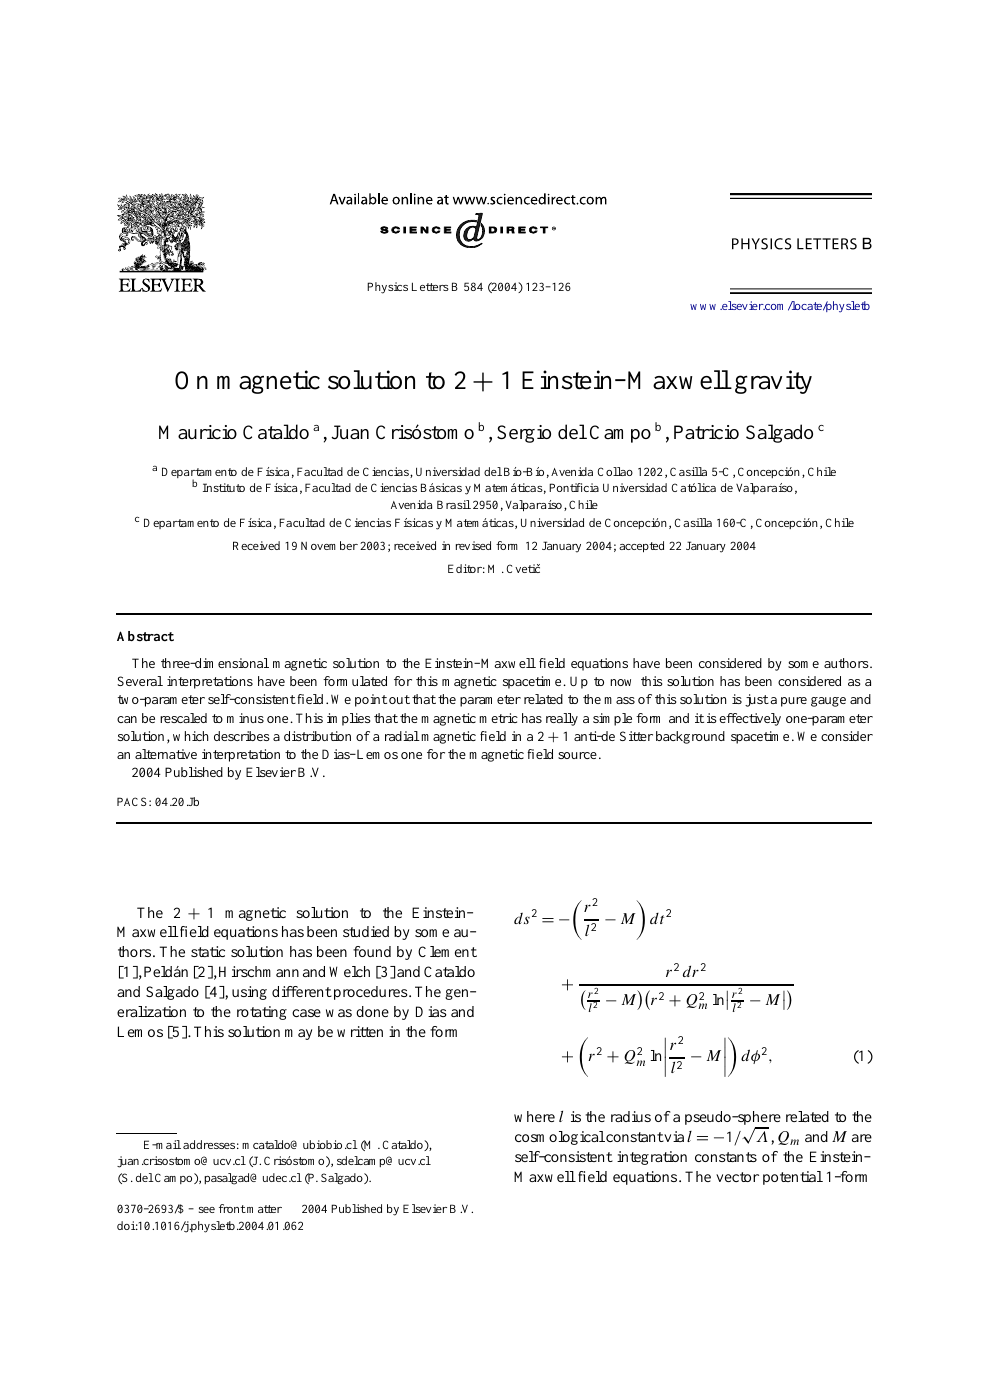 On Magnetic Solution To 2 1 Einstein Maxwell Gravity Topic Of Research Paper In Physical Sciences Download Scholarly Article Pdf And Read For Free On Cyberleninka Open Science Hub